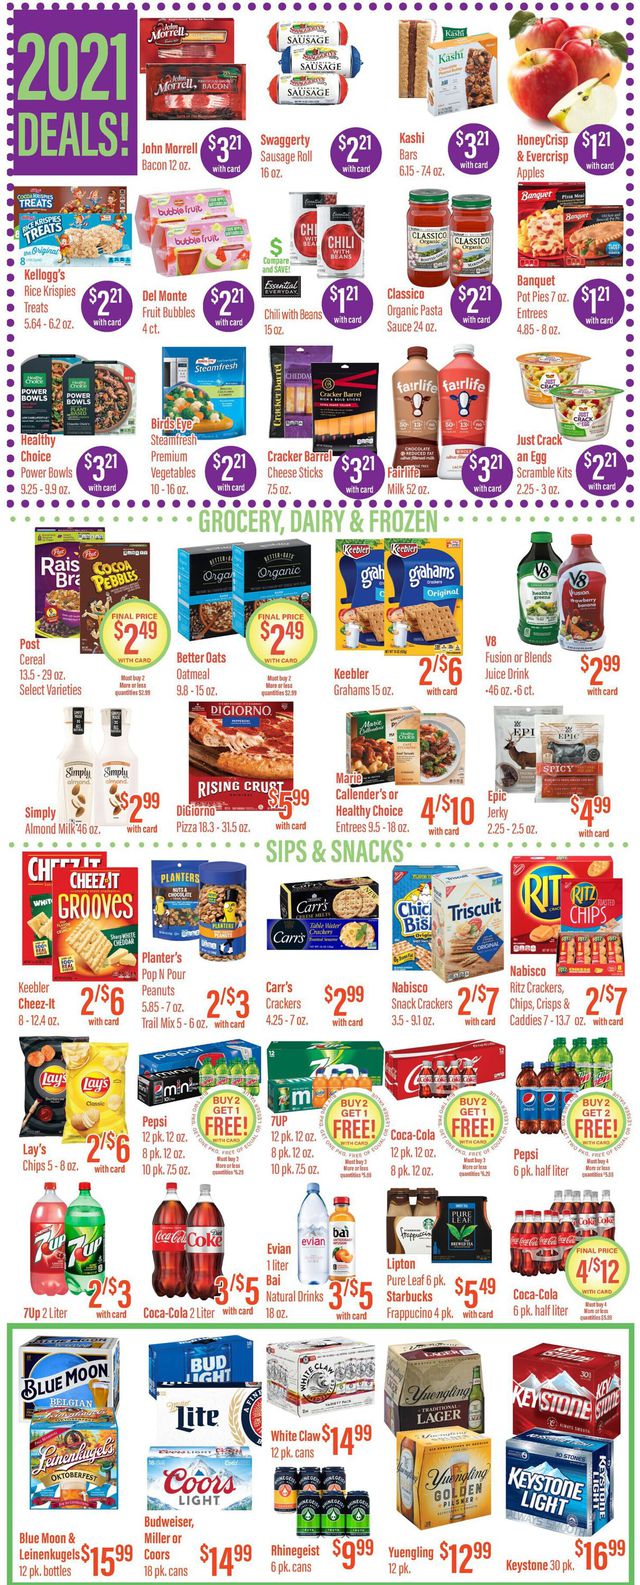 Remke Markets Ad from 01/07/2021